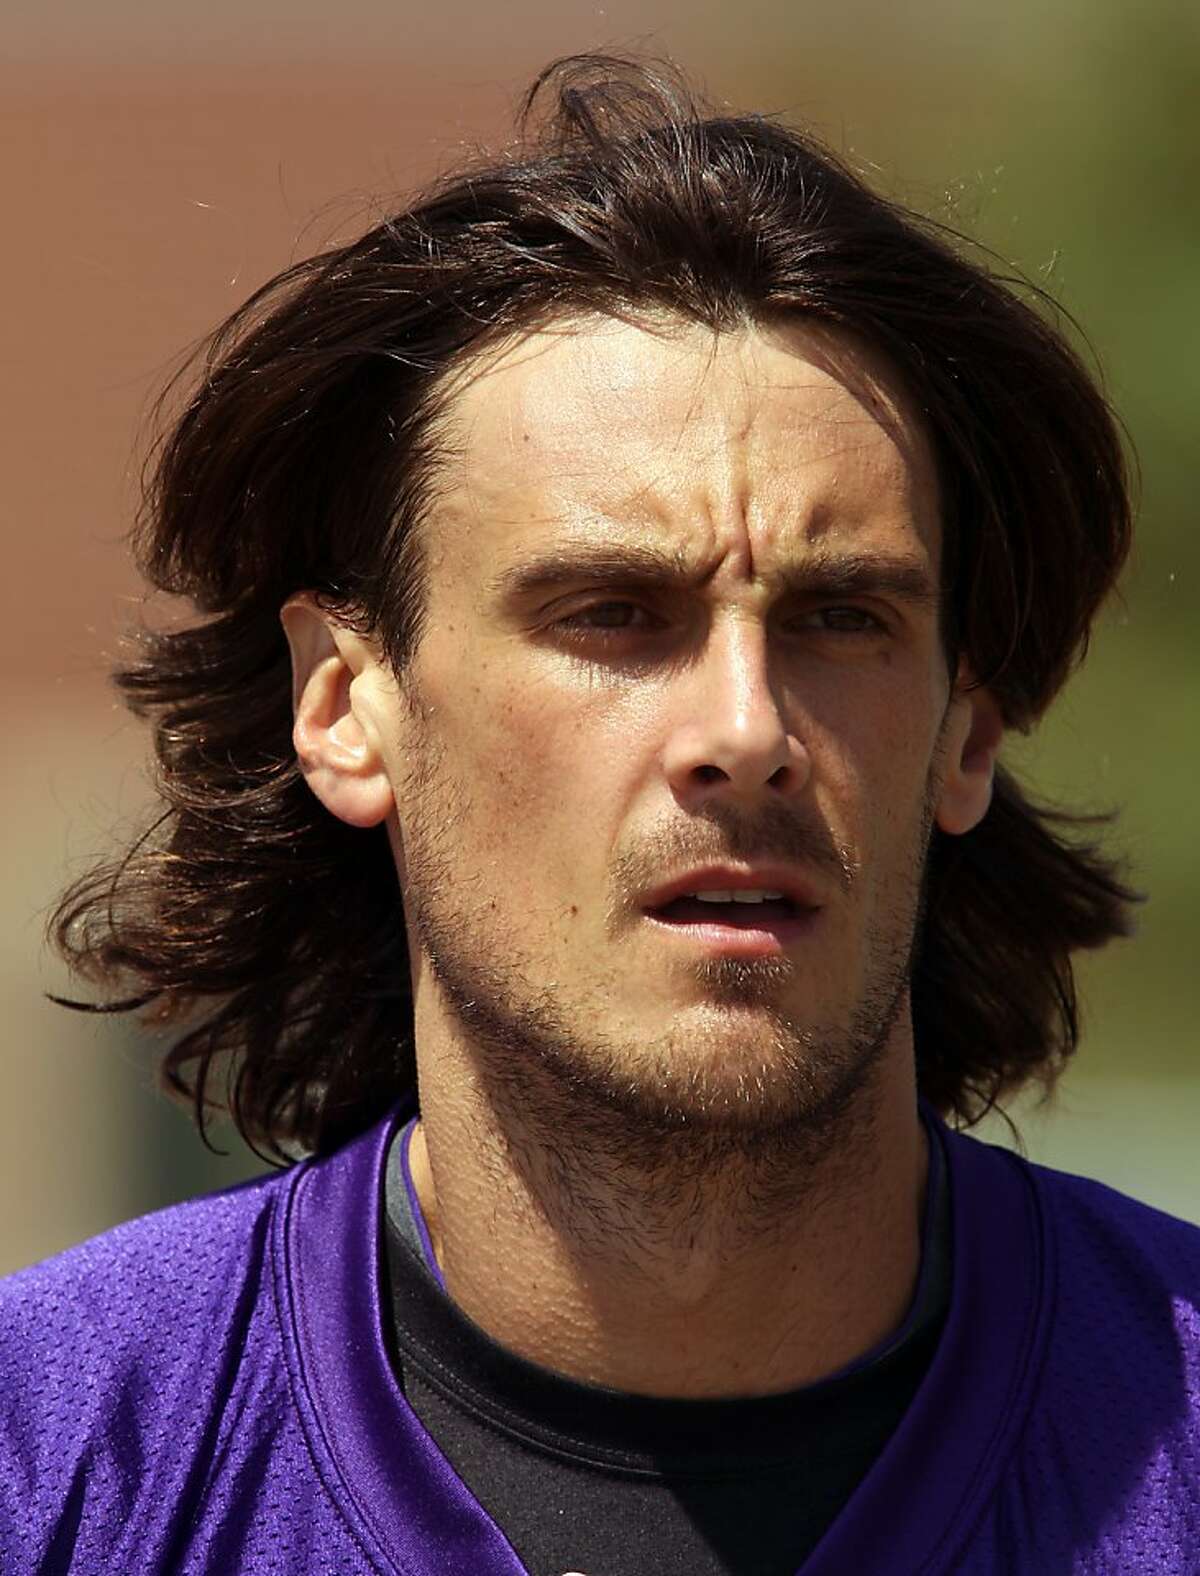 In this July 28, 2012 photo, Minnesota Vikings punter Chris Kluwe is shown at NFL football training camp in Mankato, Minn. NFL punters are only seen on fourth down, and heard from less than that. But with a constitutional gay marriage ban on Minnesota's ballot this fall, Kluwe has emerged as a high-profile gay rights champion _ and a symbol of changing attitudes toward homosexuality in the sports world. (AP Photo/Genevieve Ross)